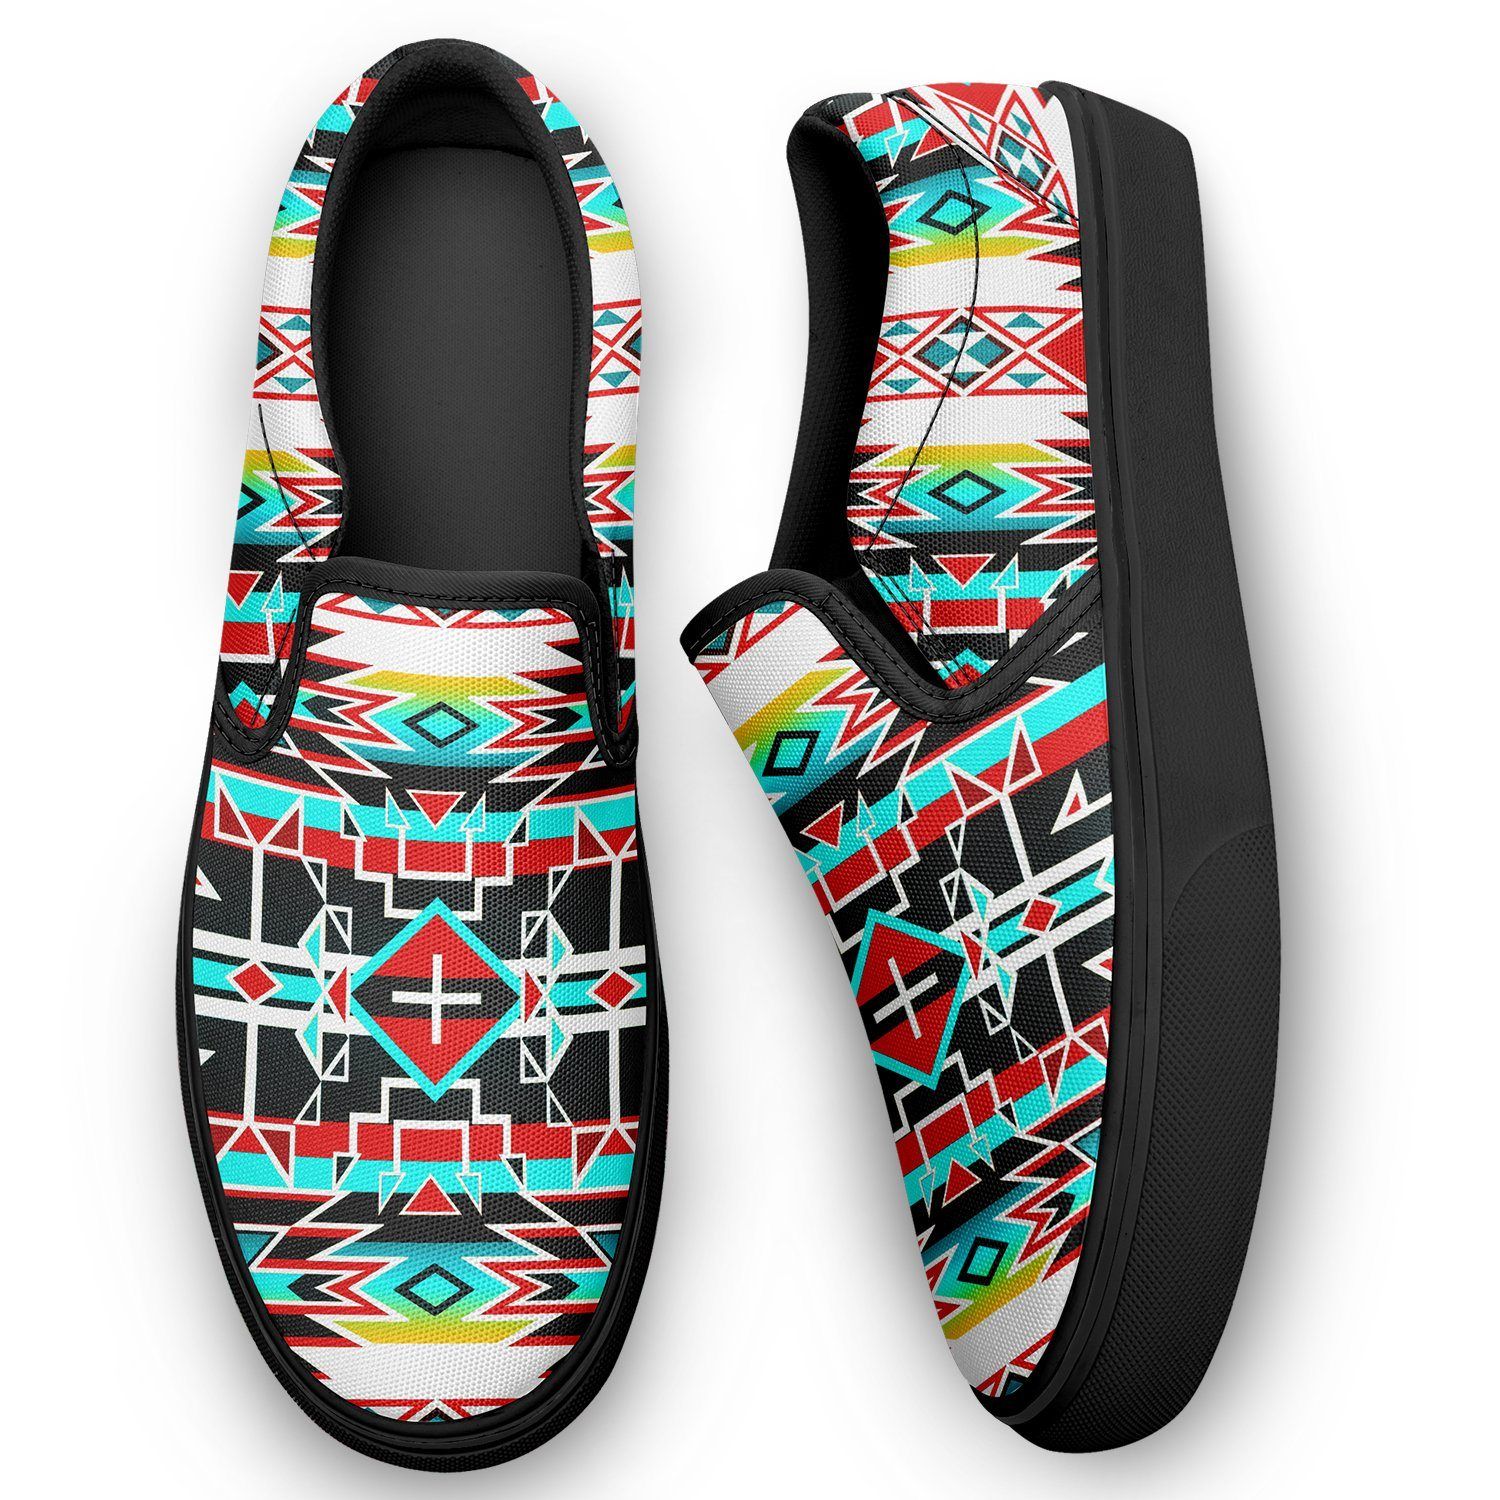 Force of Nature Windstorm Otoyimm Kid's Canvas Slip On Shoes 49 Dzine 